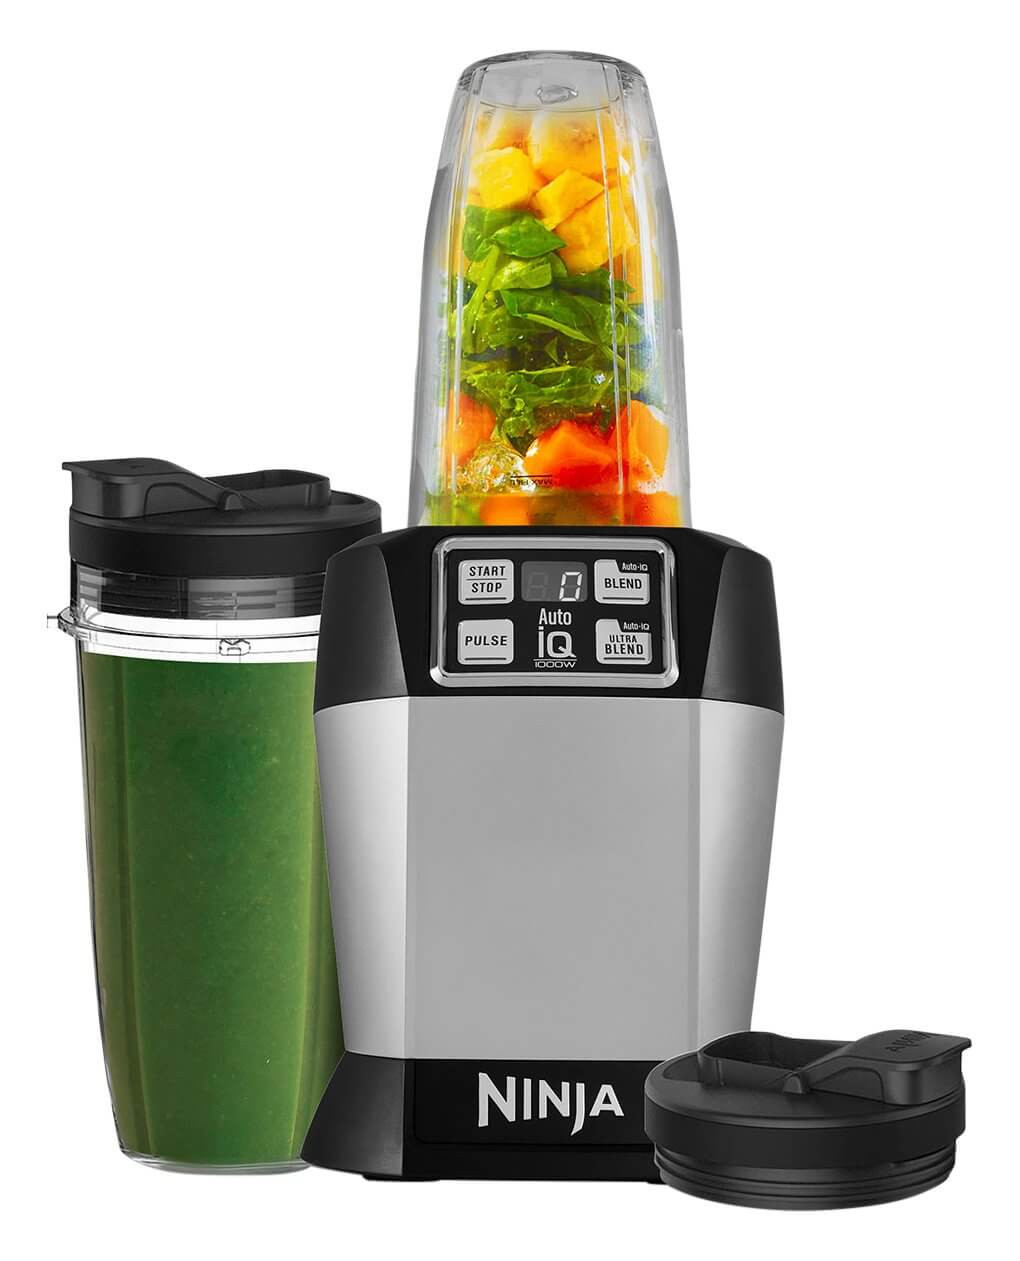 Best Blender For Smoothies And Ice
 Best Blender For Crushing Ice For Perfect Smoothies 2019